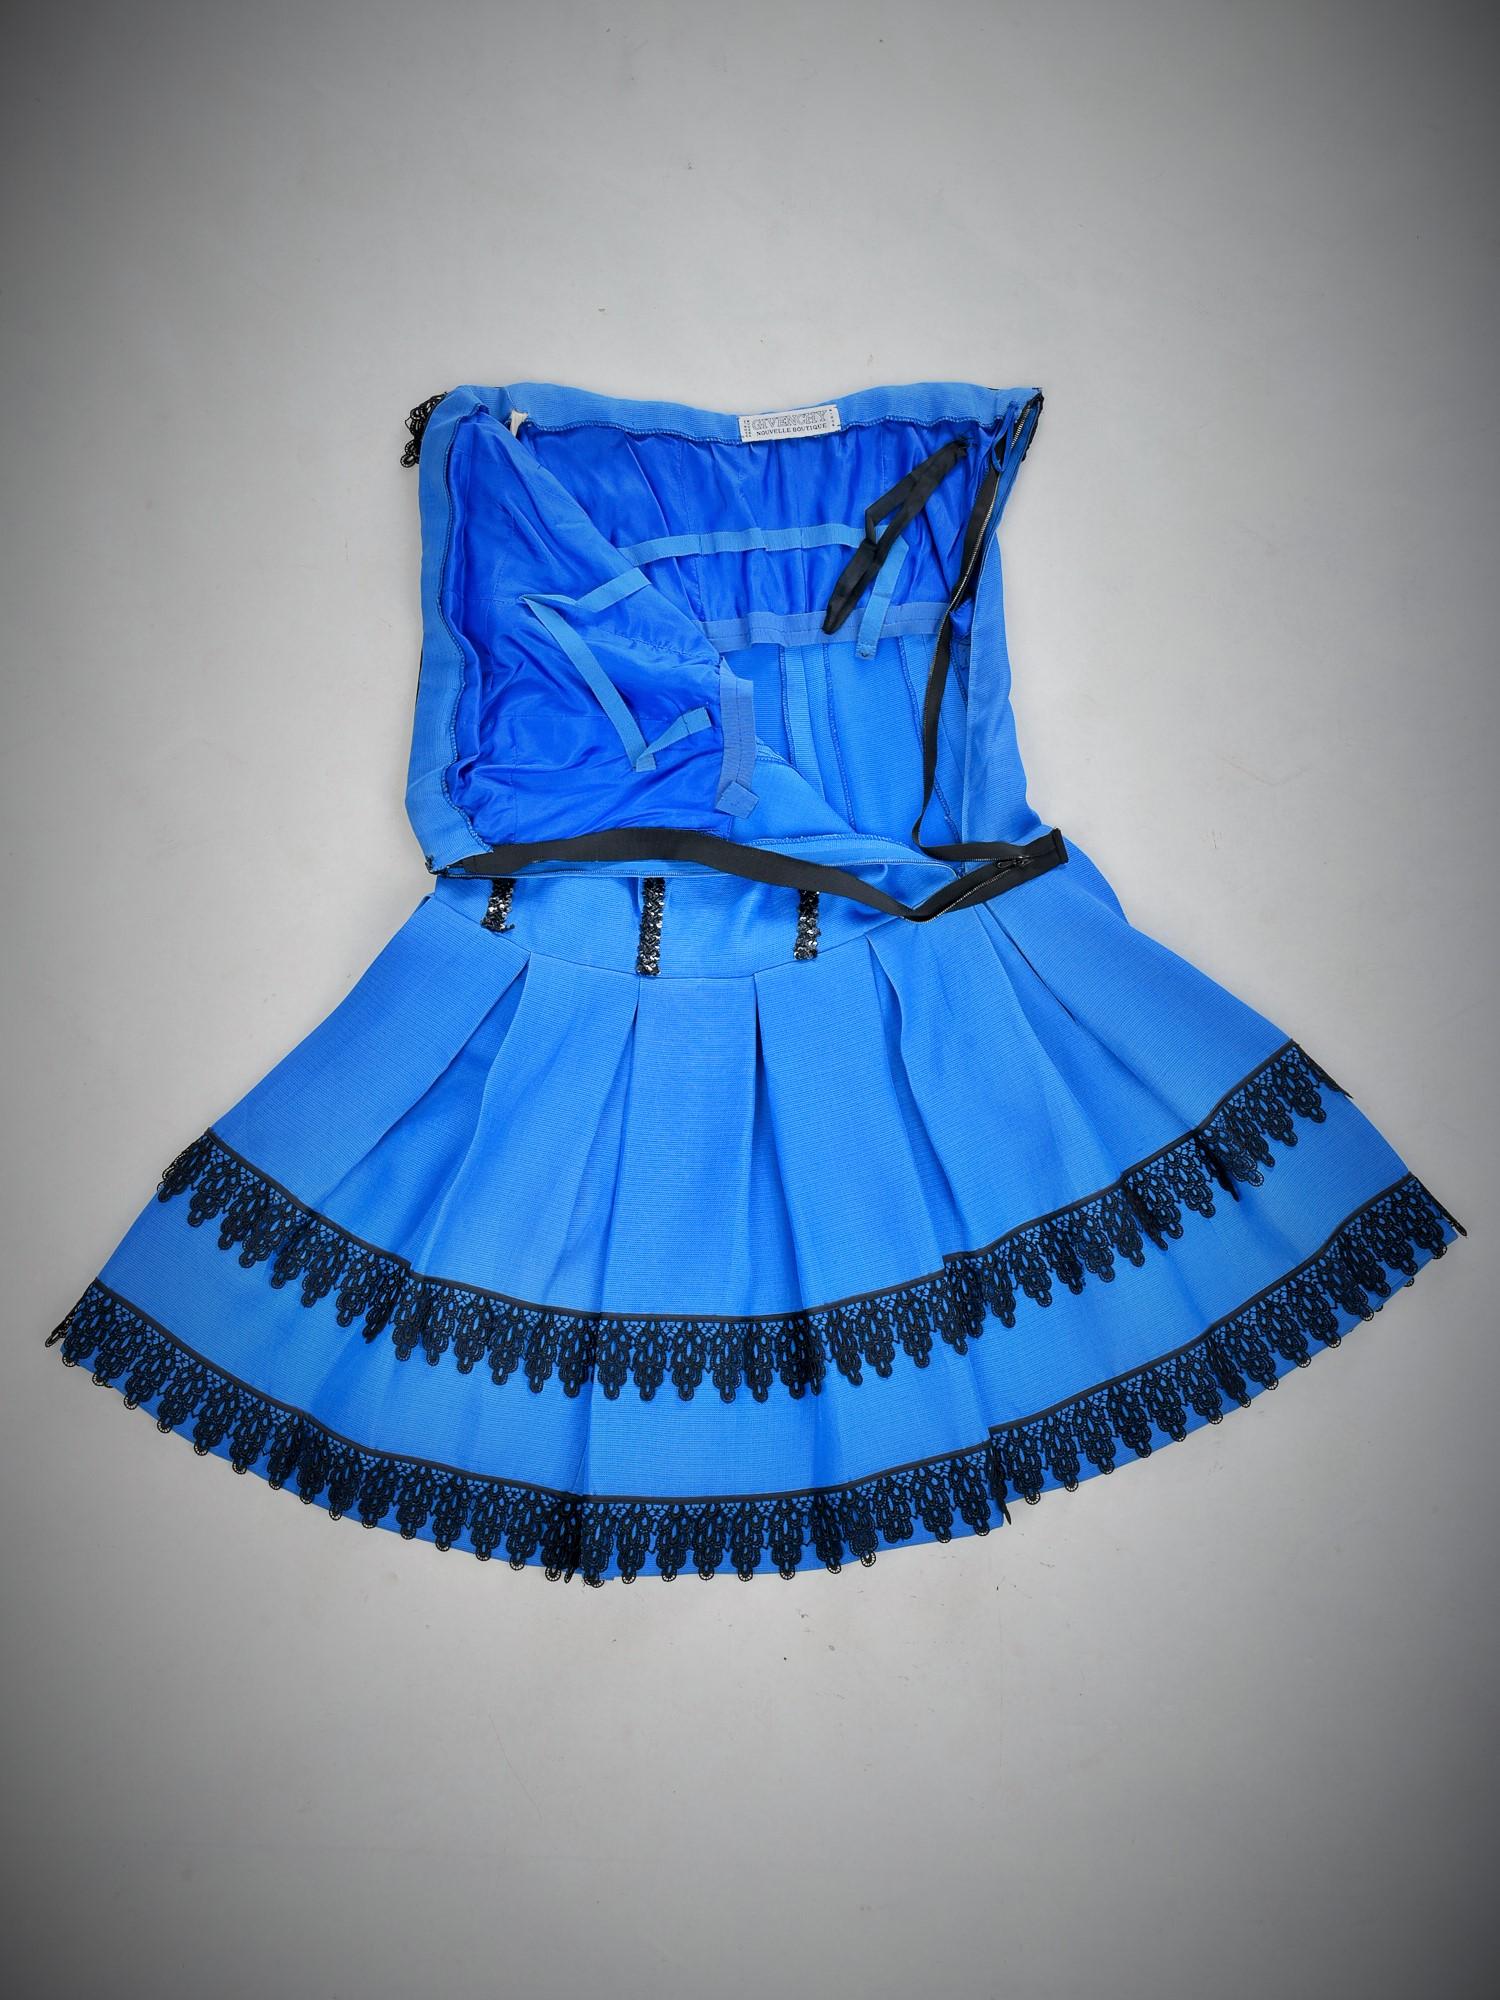 Blue Hubert de Givenchy Cocktail Dress in Gazar Silk and Lace Circa 1968/1970 For Sale